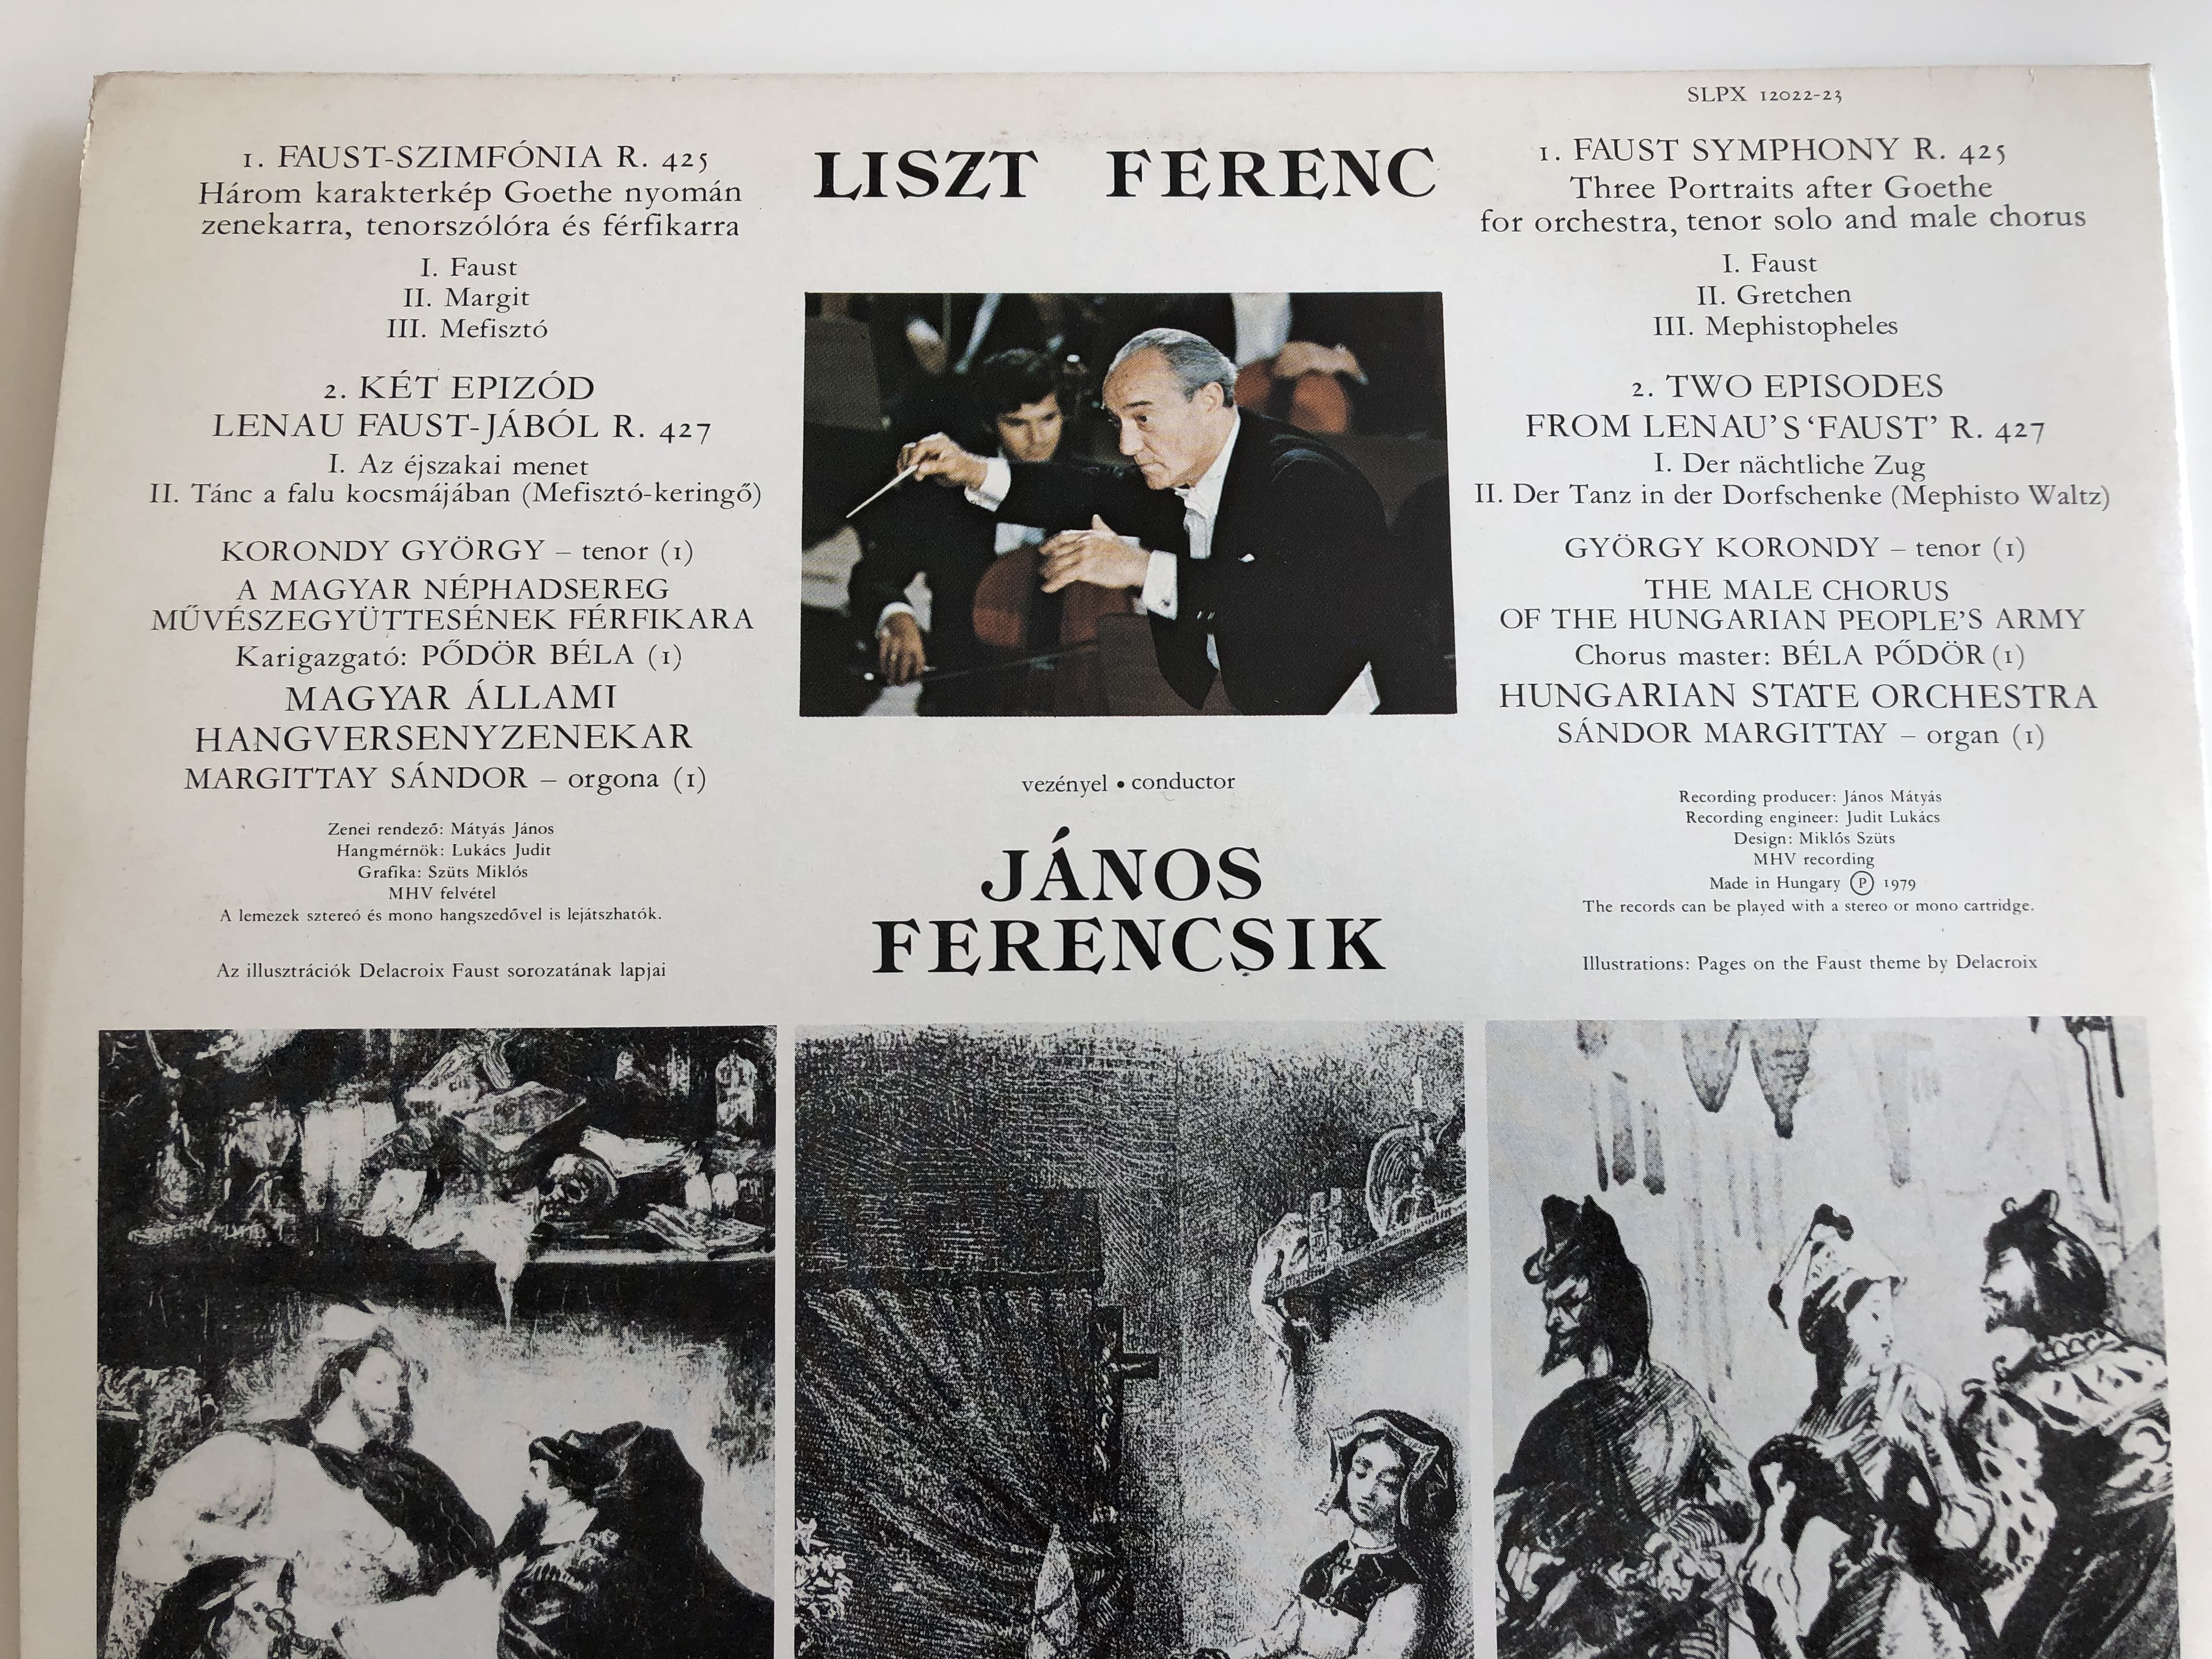 liszt-faust-symphony-two-episodes-from-lenau-s-faust-gy-rgy-korondy-hungarian-state-orchestra-conducted-j-nos-ferencsik-hungaroton-2x-lp-stereo-slpx-12022-23-5-.jpg